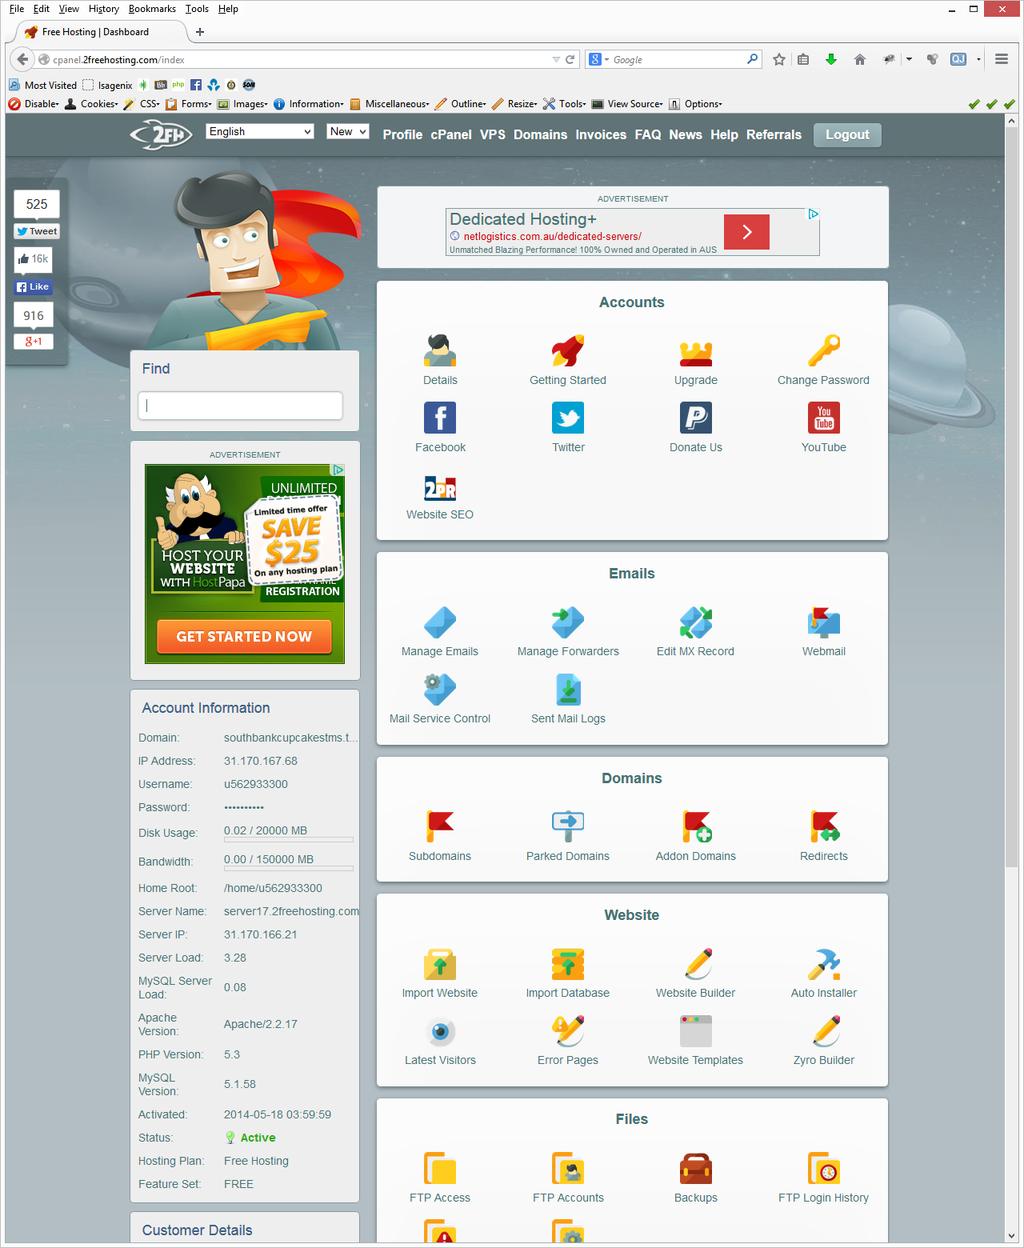 5. The cpanel is the Control Panel that allows you to manage